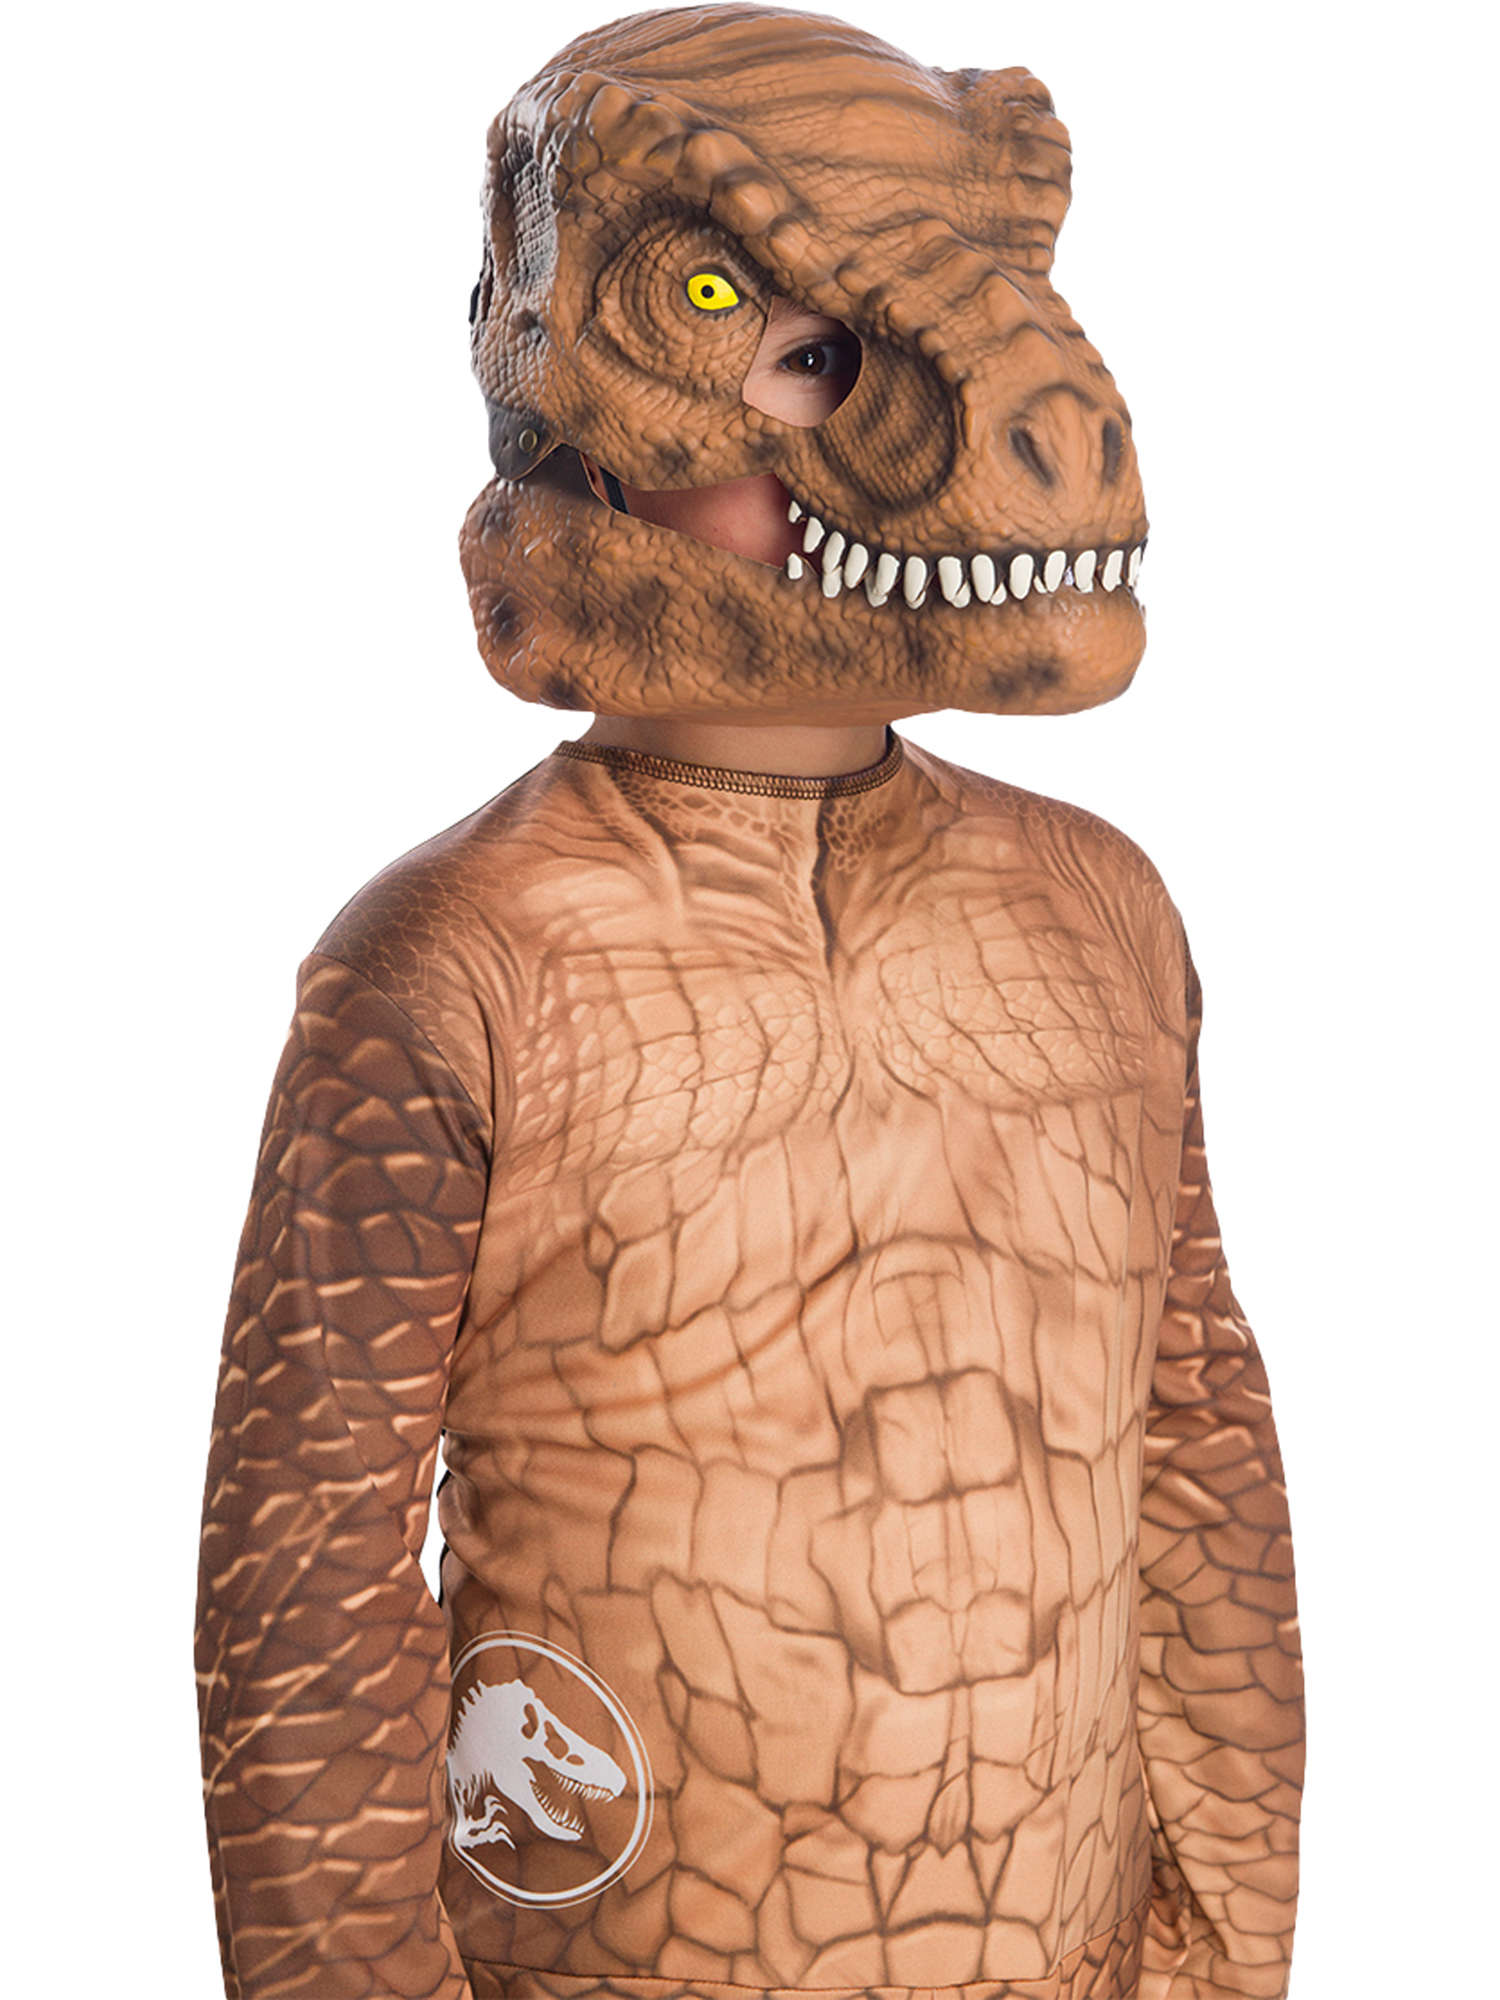 T-Rex, Jurassic World, Jurassic World, Jurassic World, Multi, Jurassic Park, Mask, One Size, Front